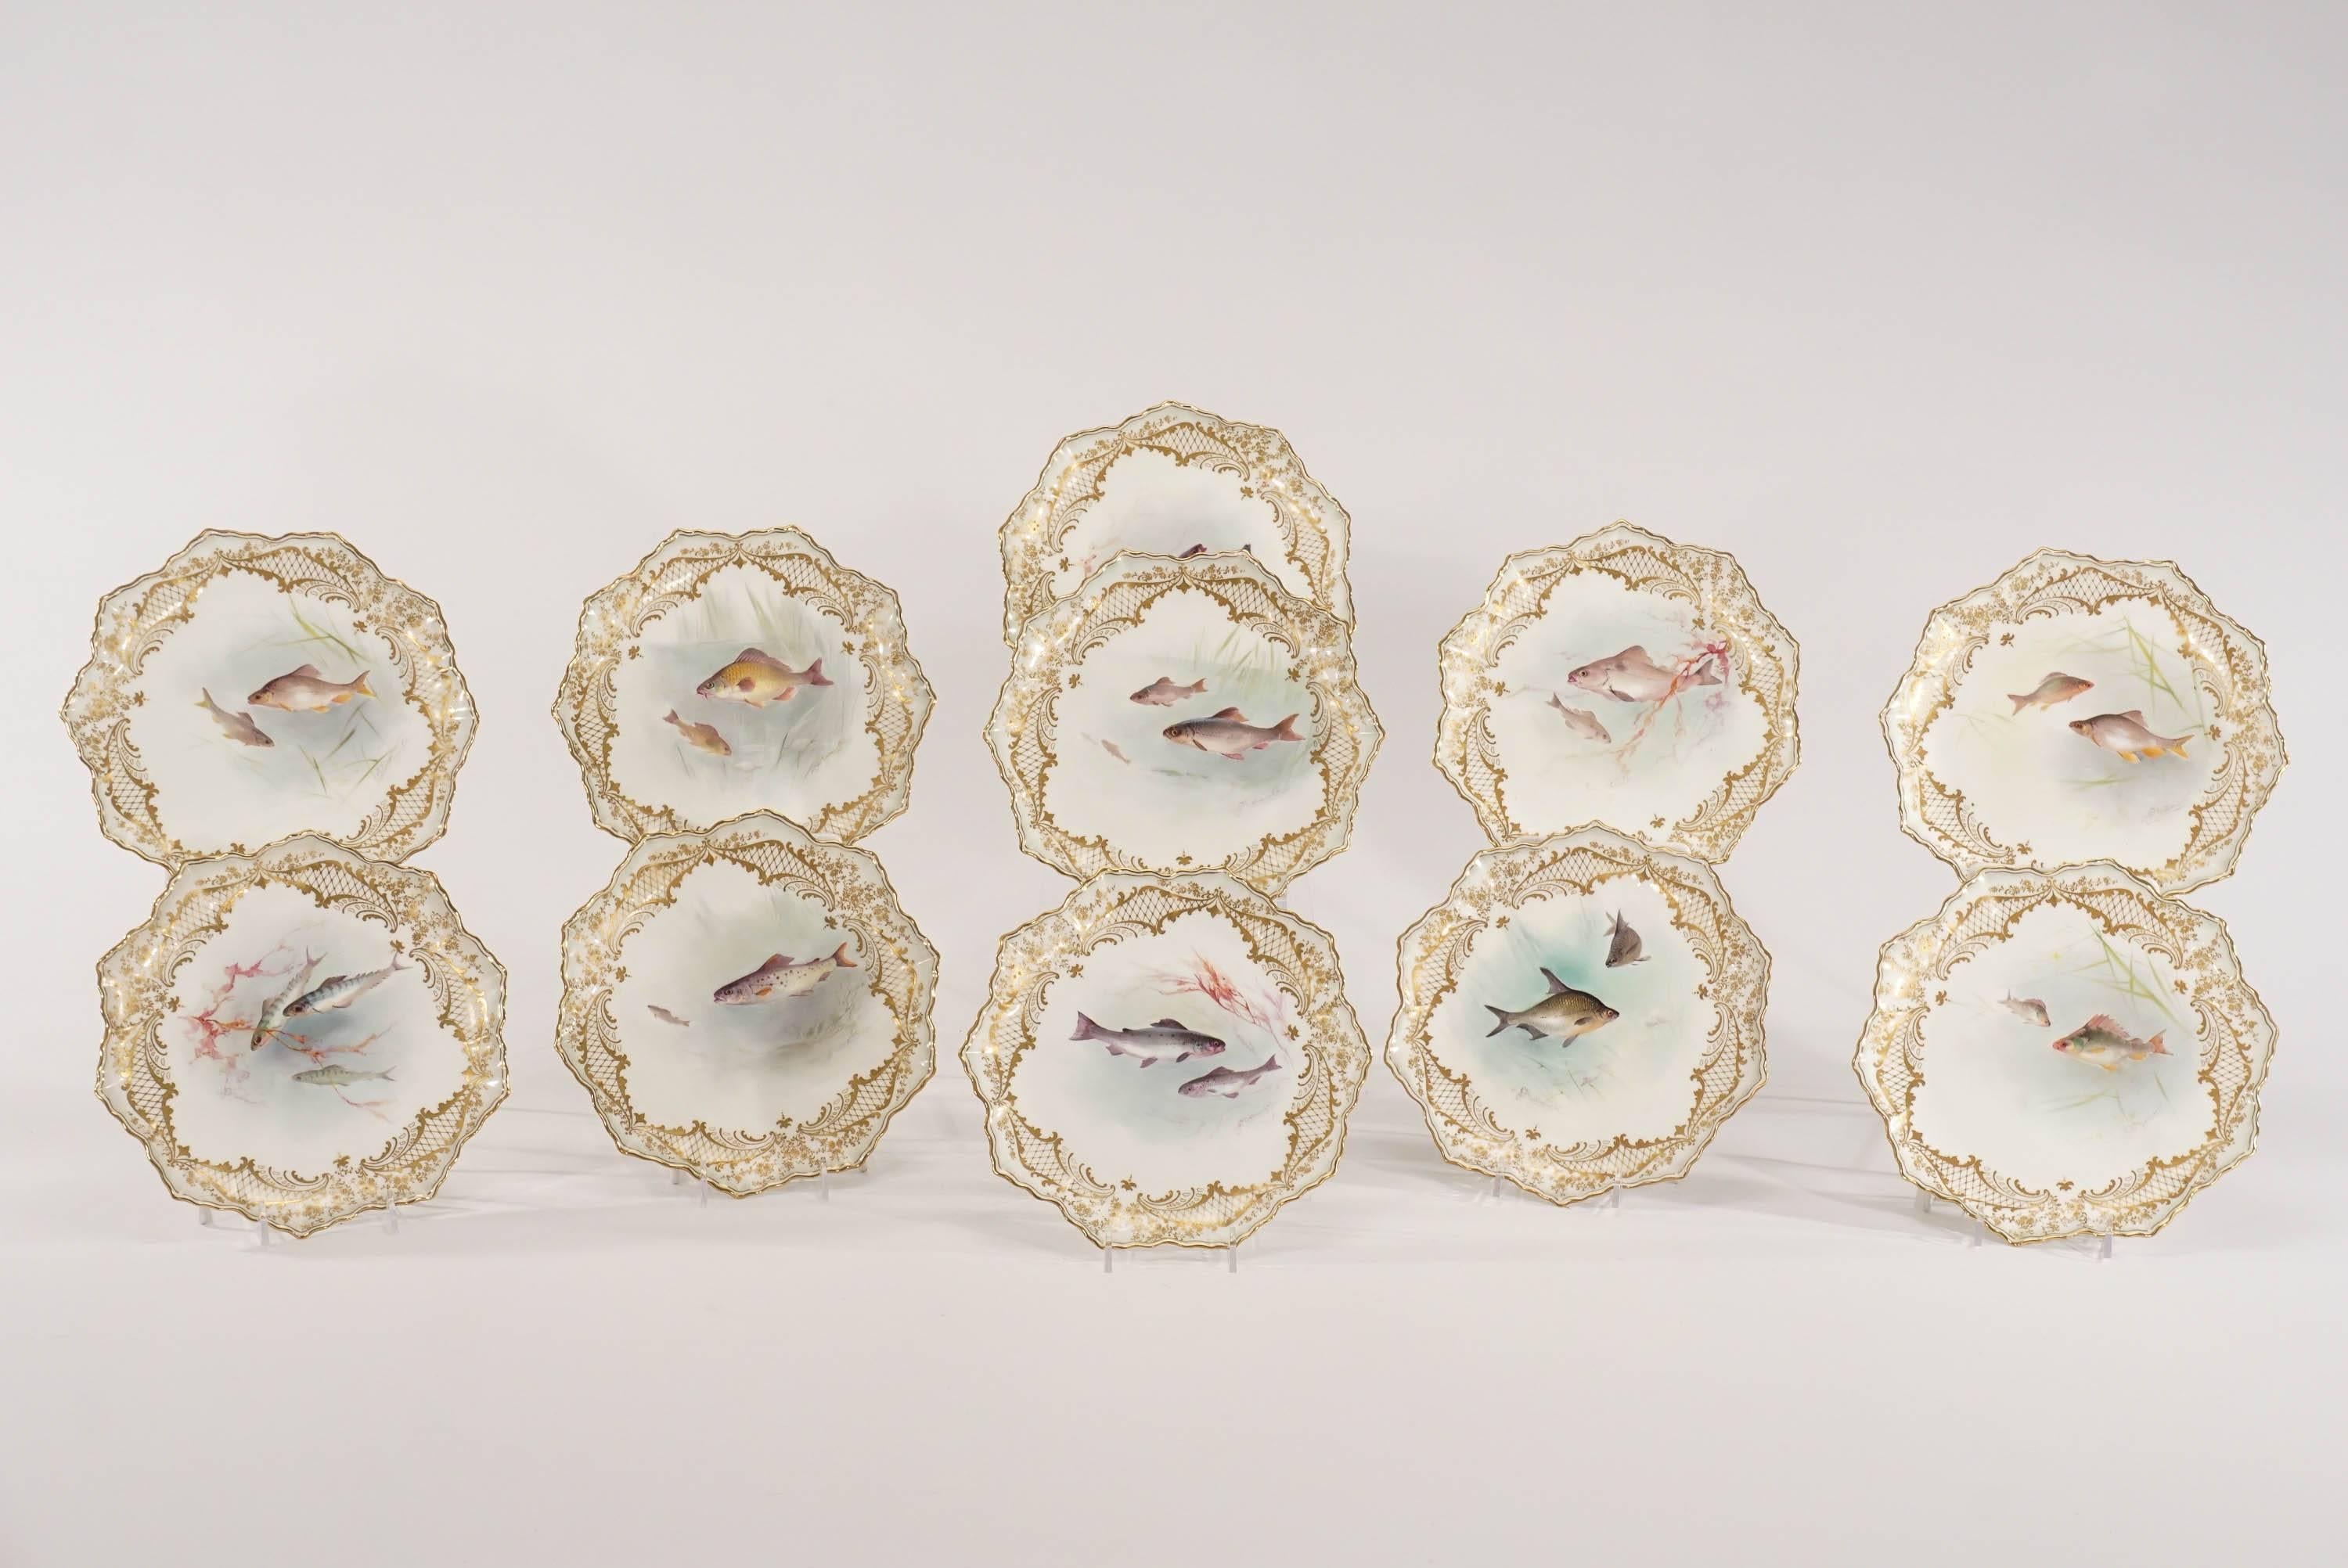 A lovely set of 11 hand painted and artist signed plates with shaped rims and trimmed with raised paste gold. The interesting 10-pointed border creates a lovely framework around the central marine life subjects, each uniquely painted with different